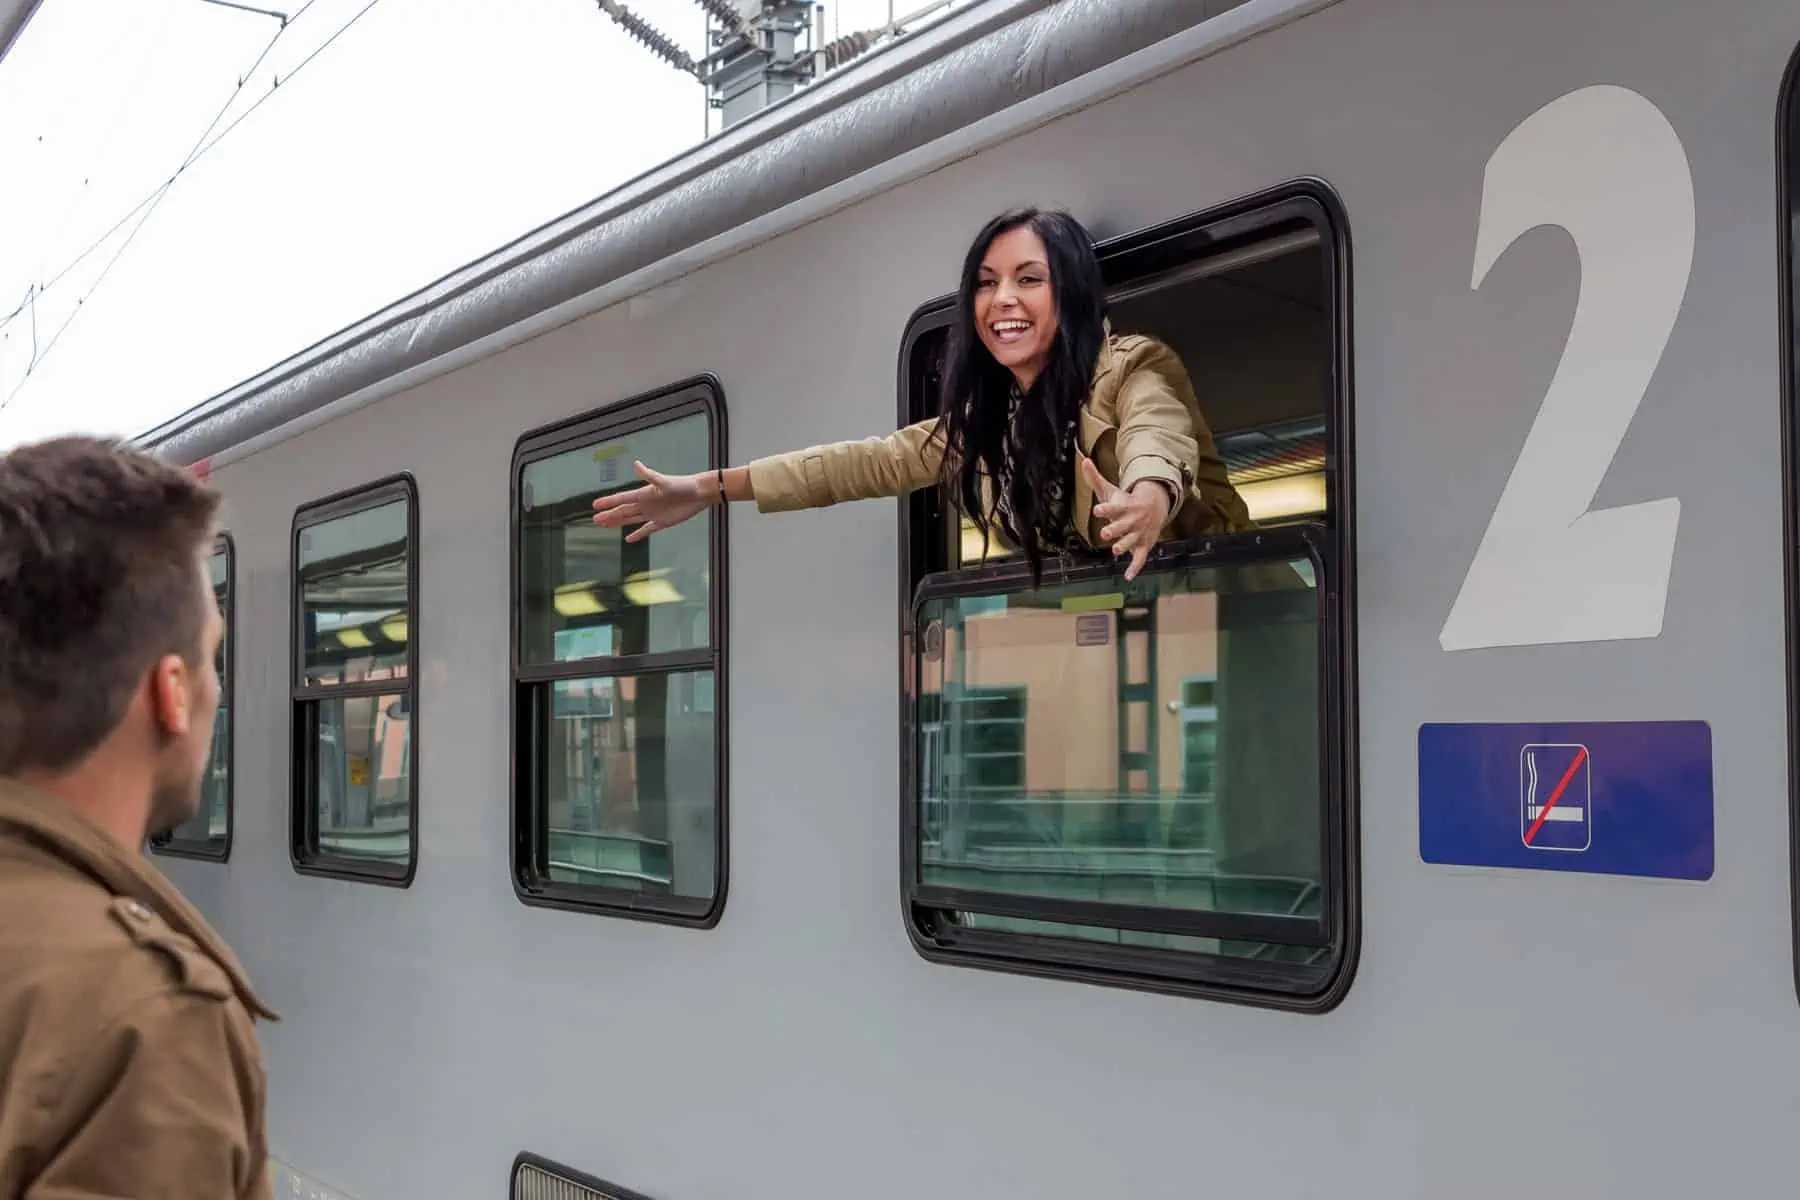 A woman is waving out the window of a train